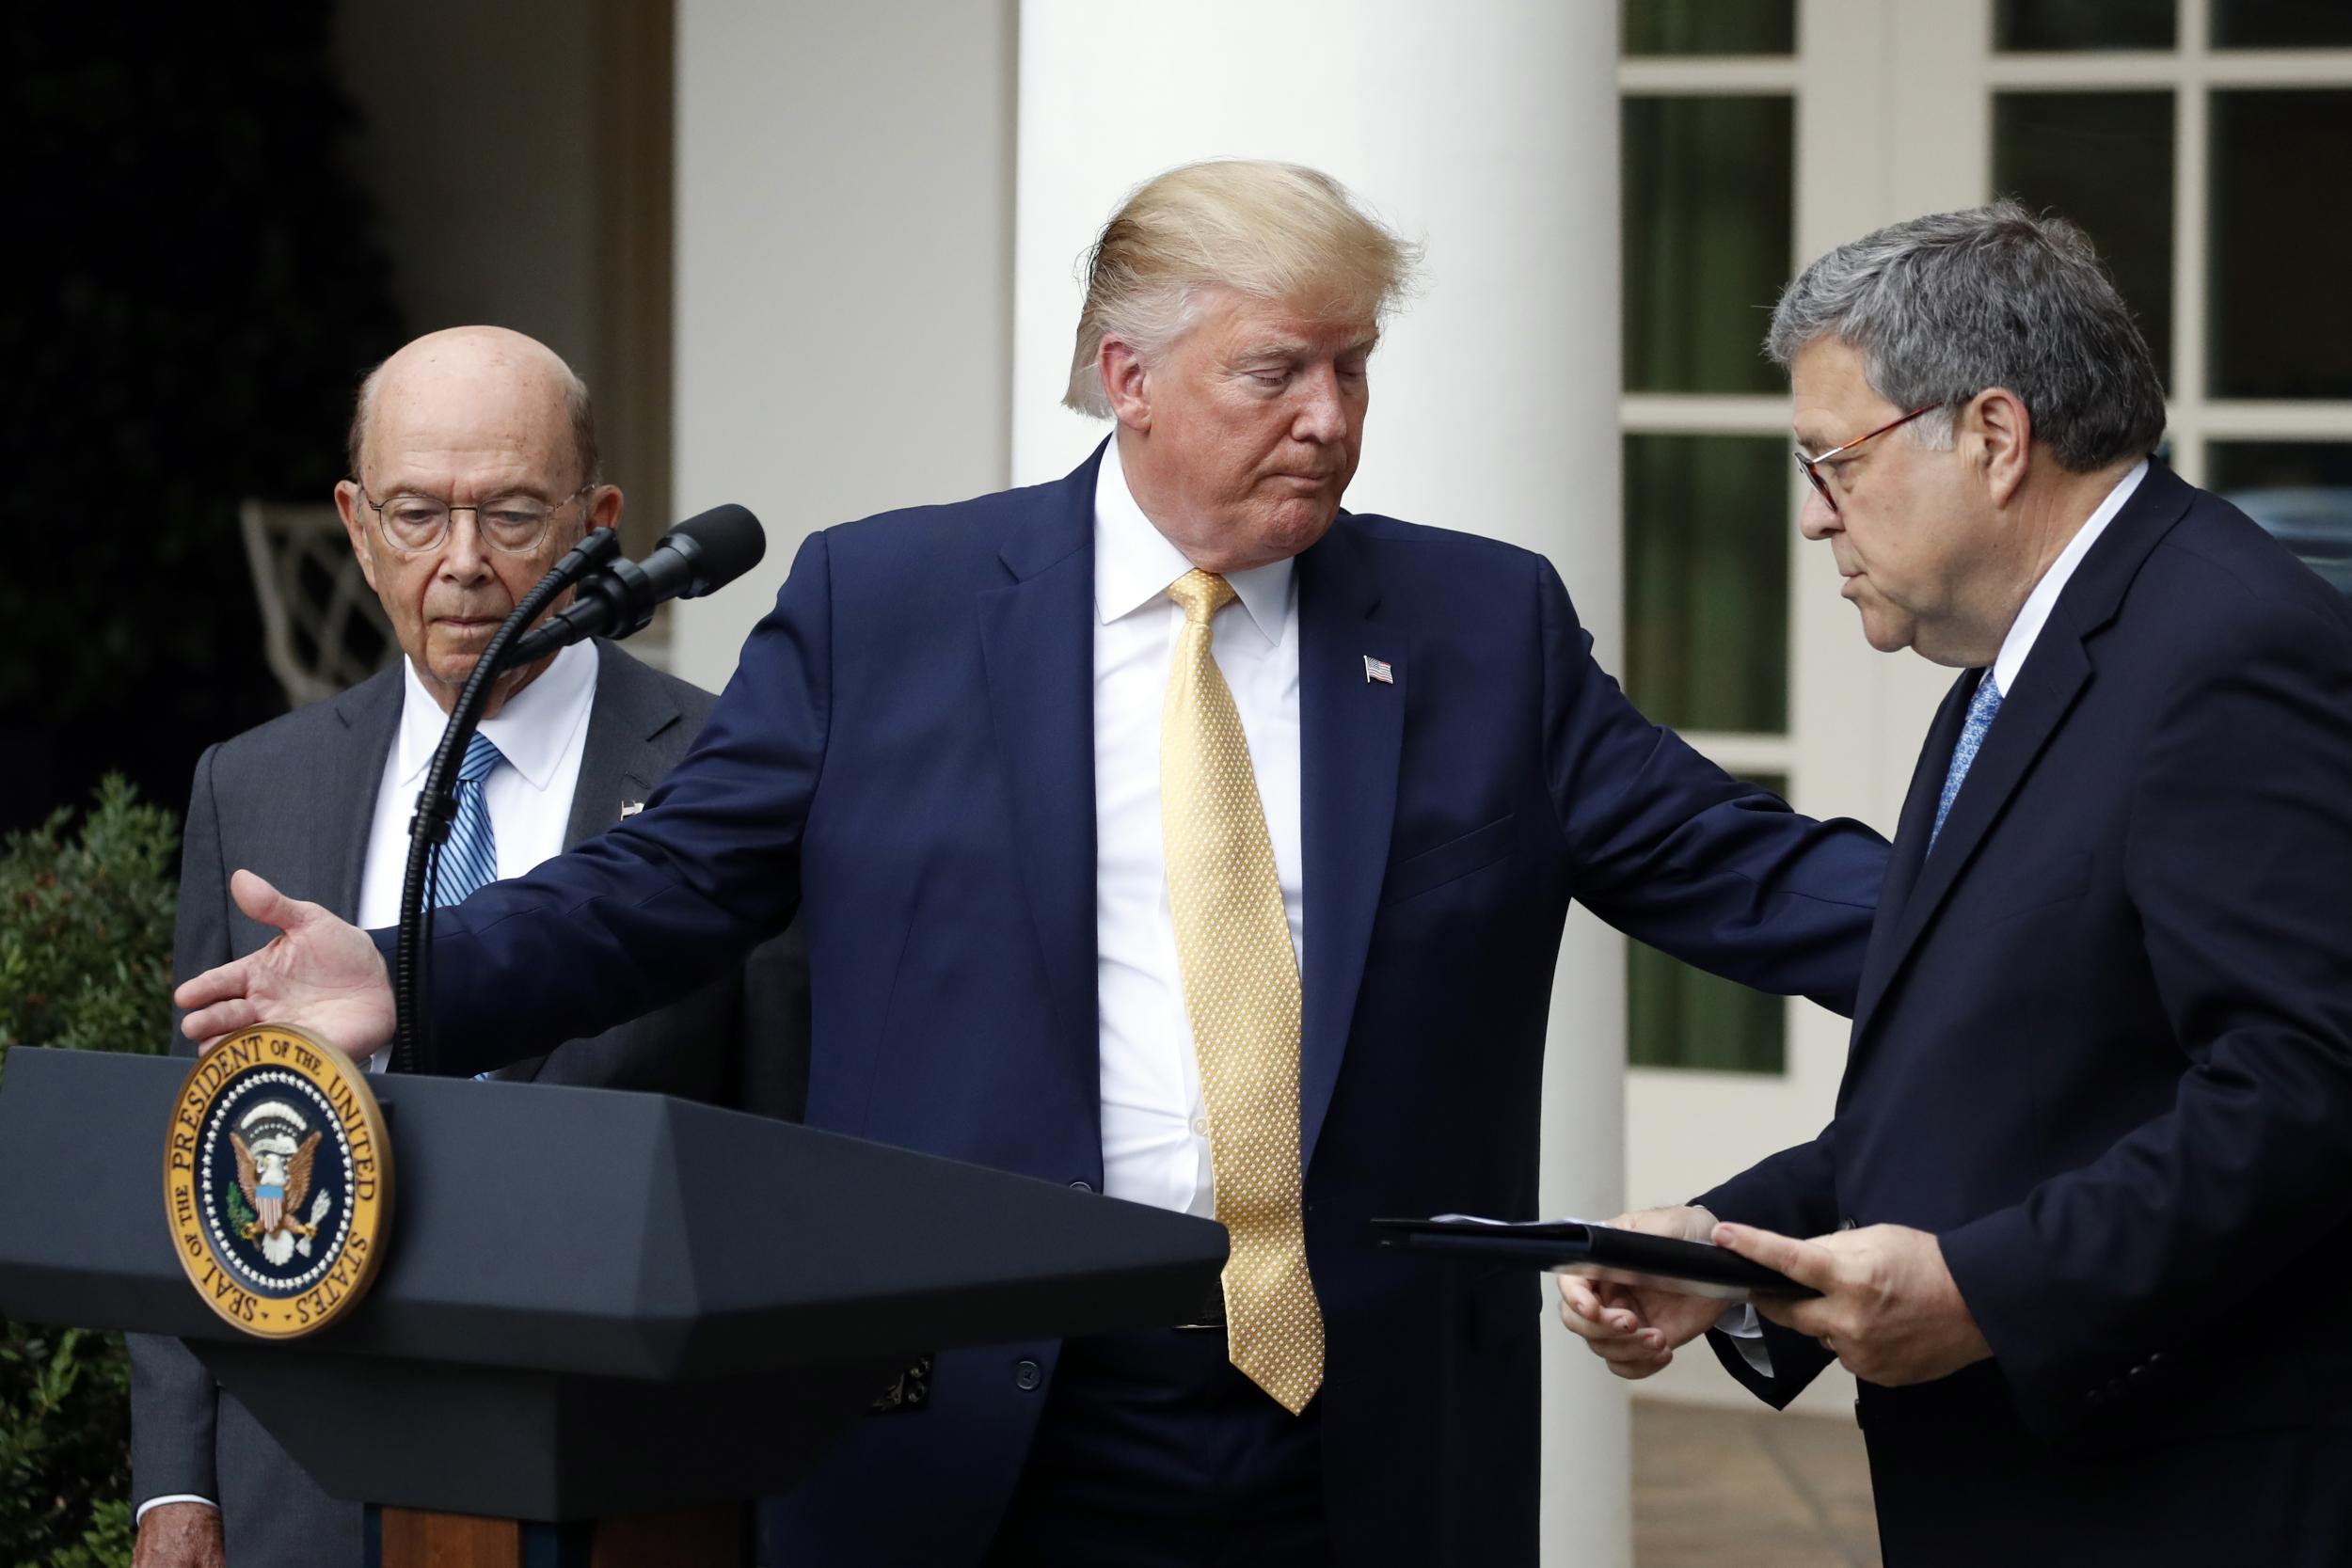 Trump folds over plan to insert citizenship question in census in major defeat for president